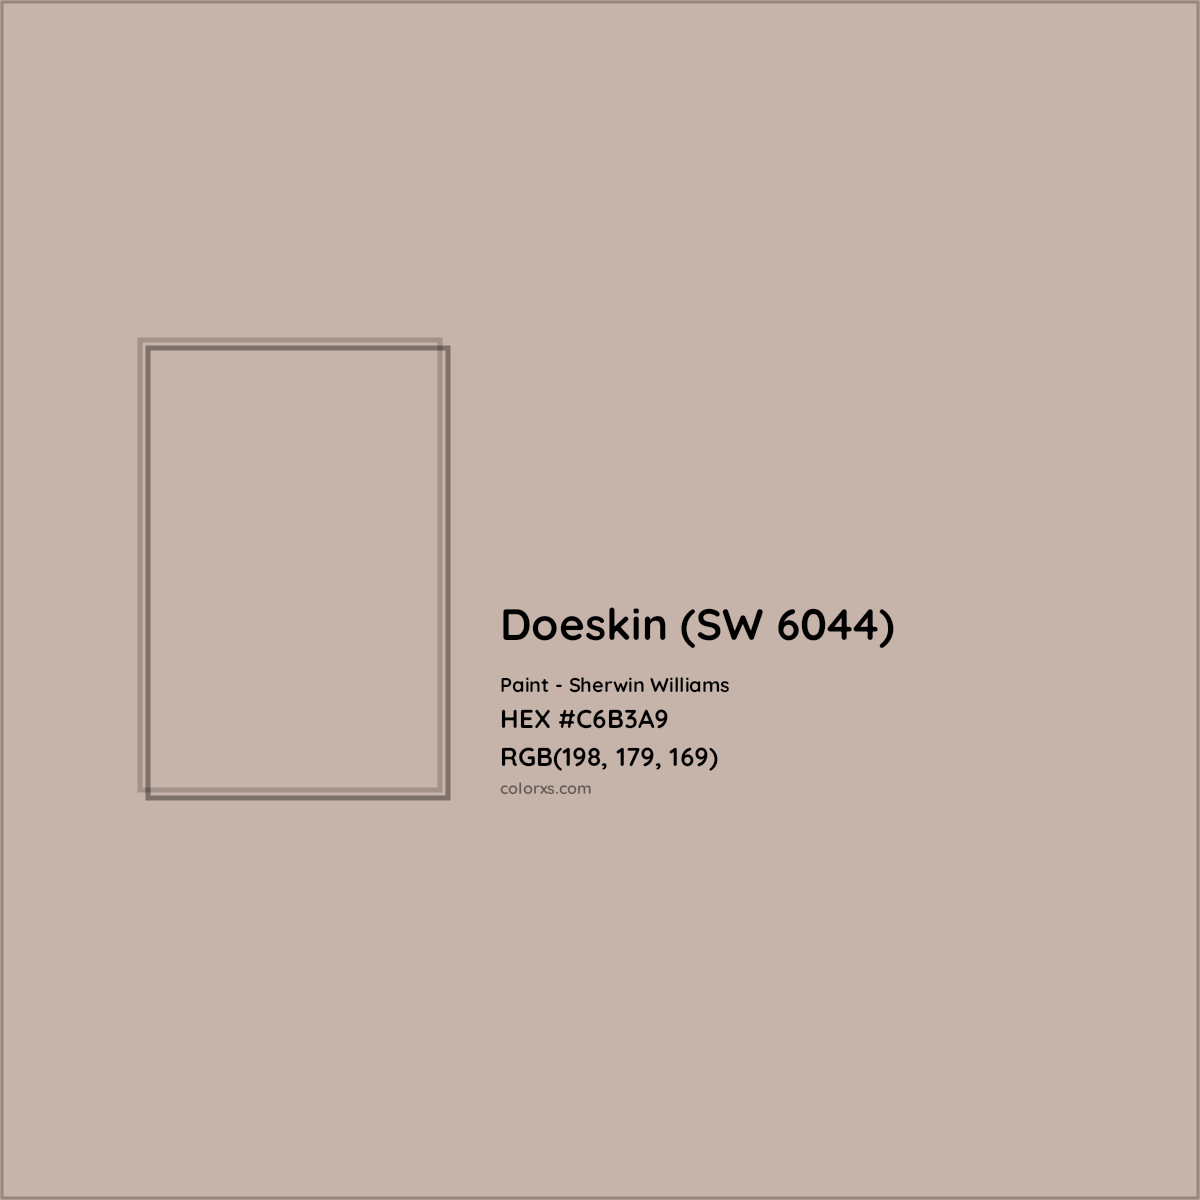 HEX #C6B3A9 Doeskin (SW 6044) Paint Sherwin Williams - Color Code